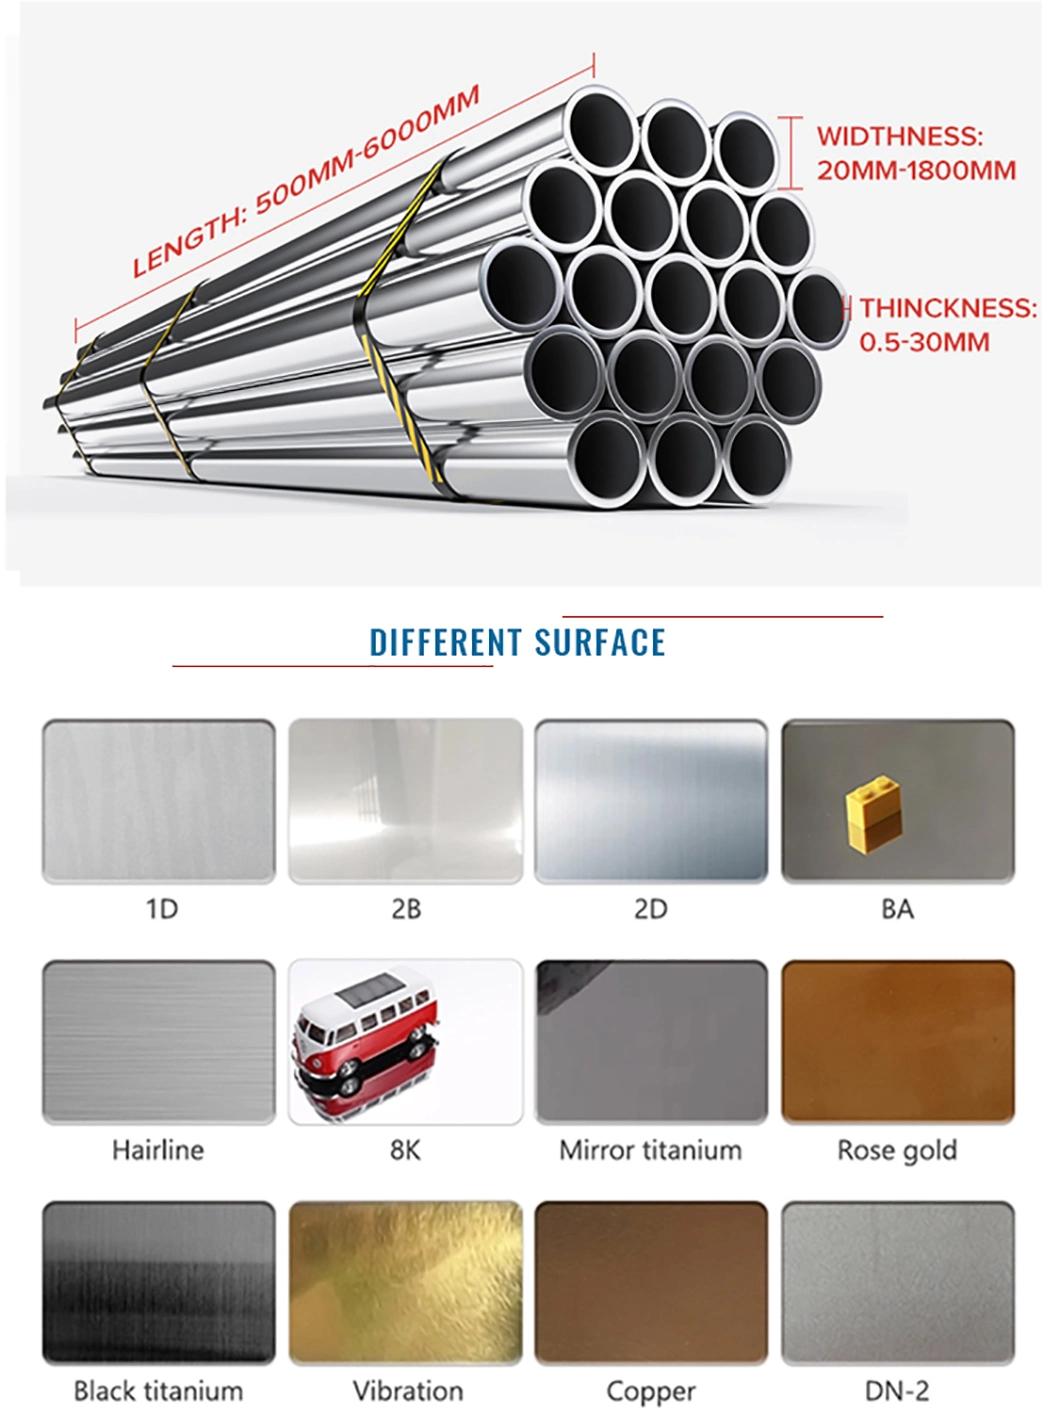 0.4mm Standard SS316 Stainless Steel Square Steel Pipe